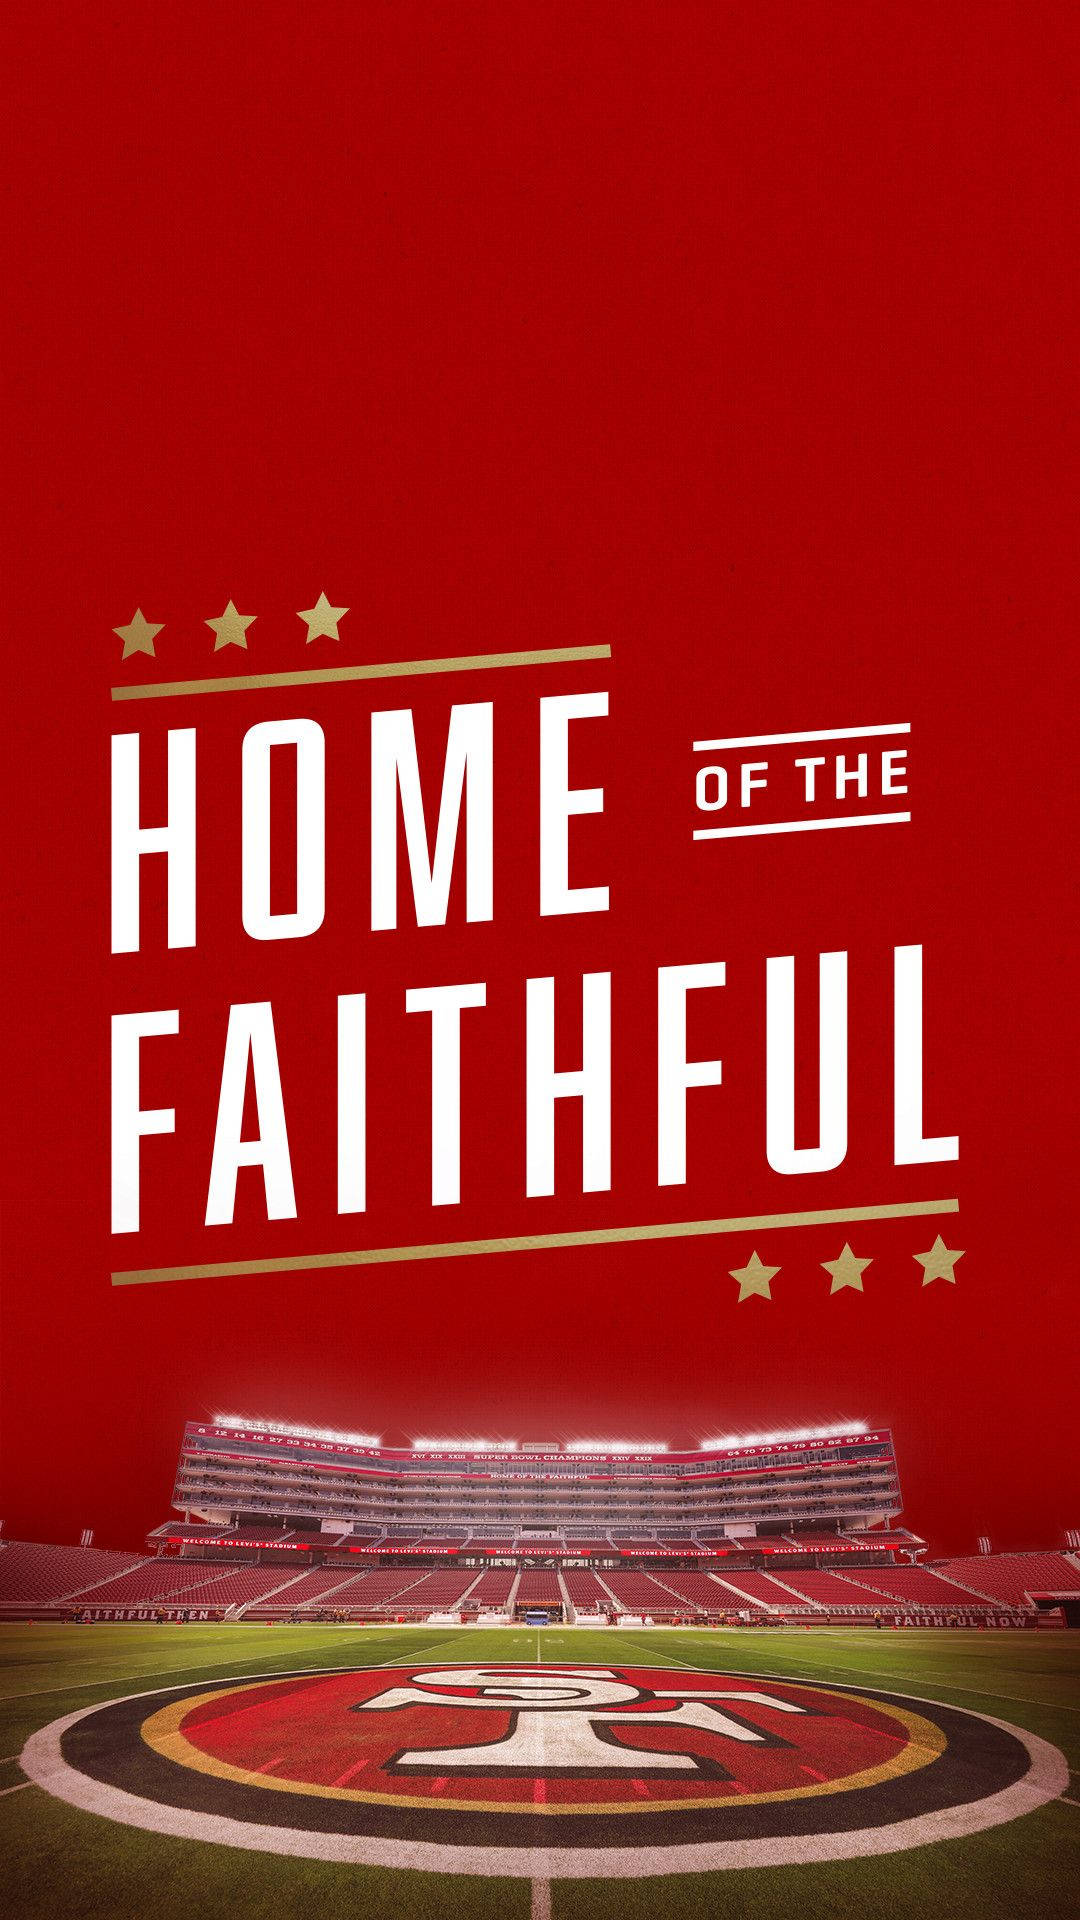 Home Of The Faithful 49ers Iphone Wallpaper